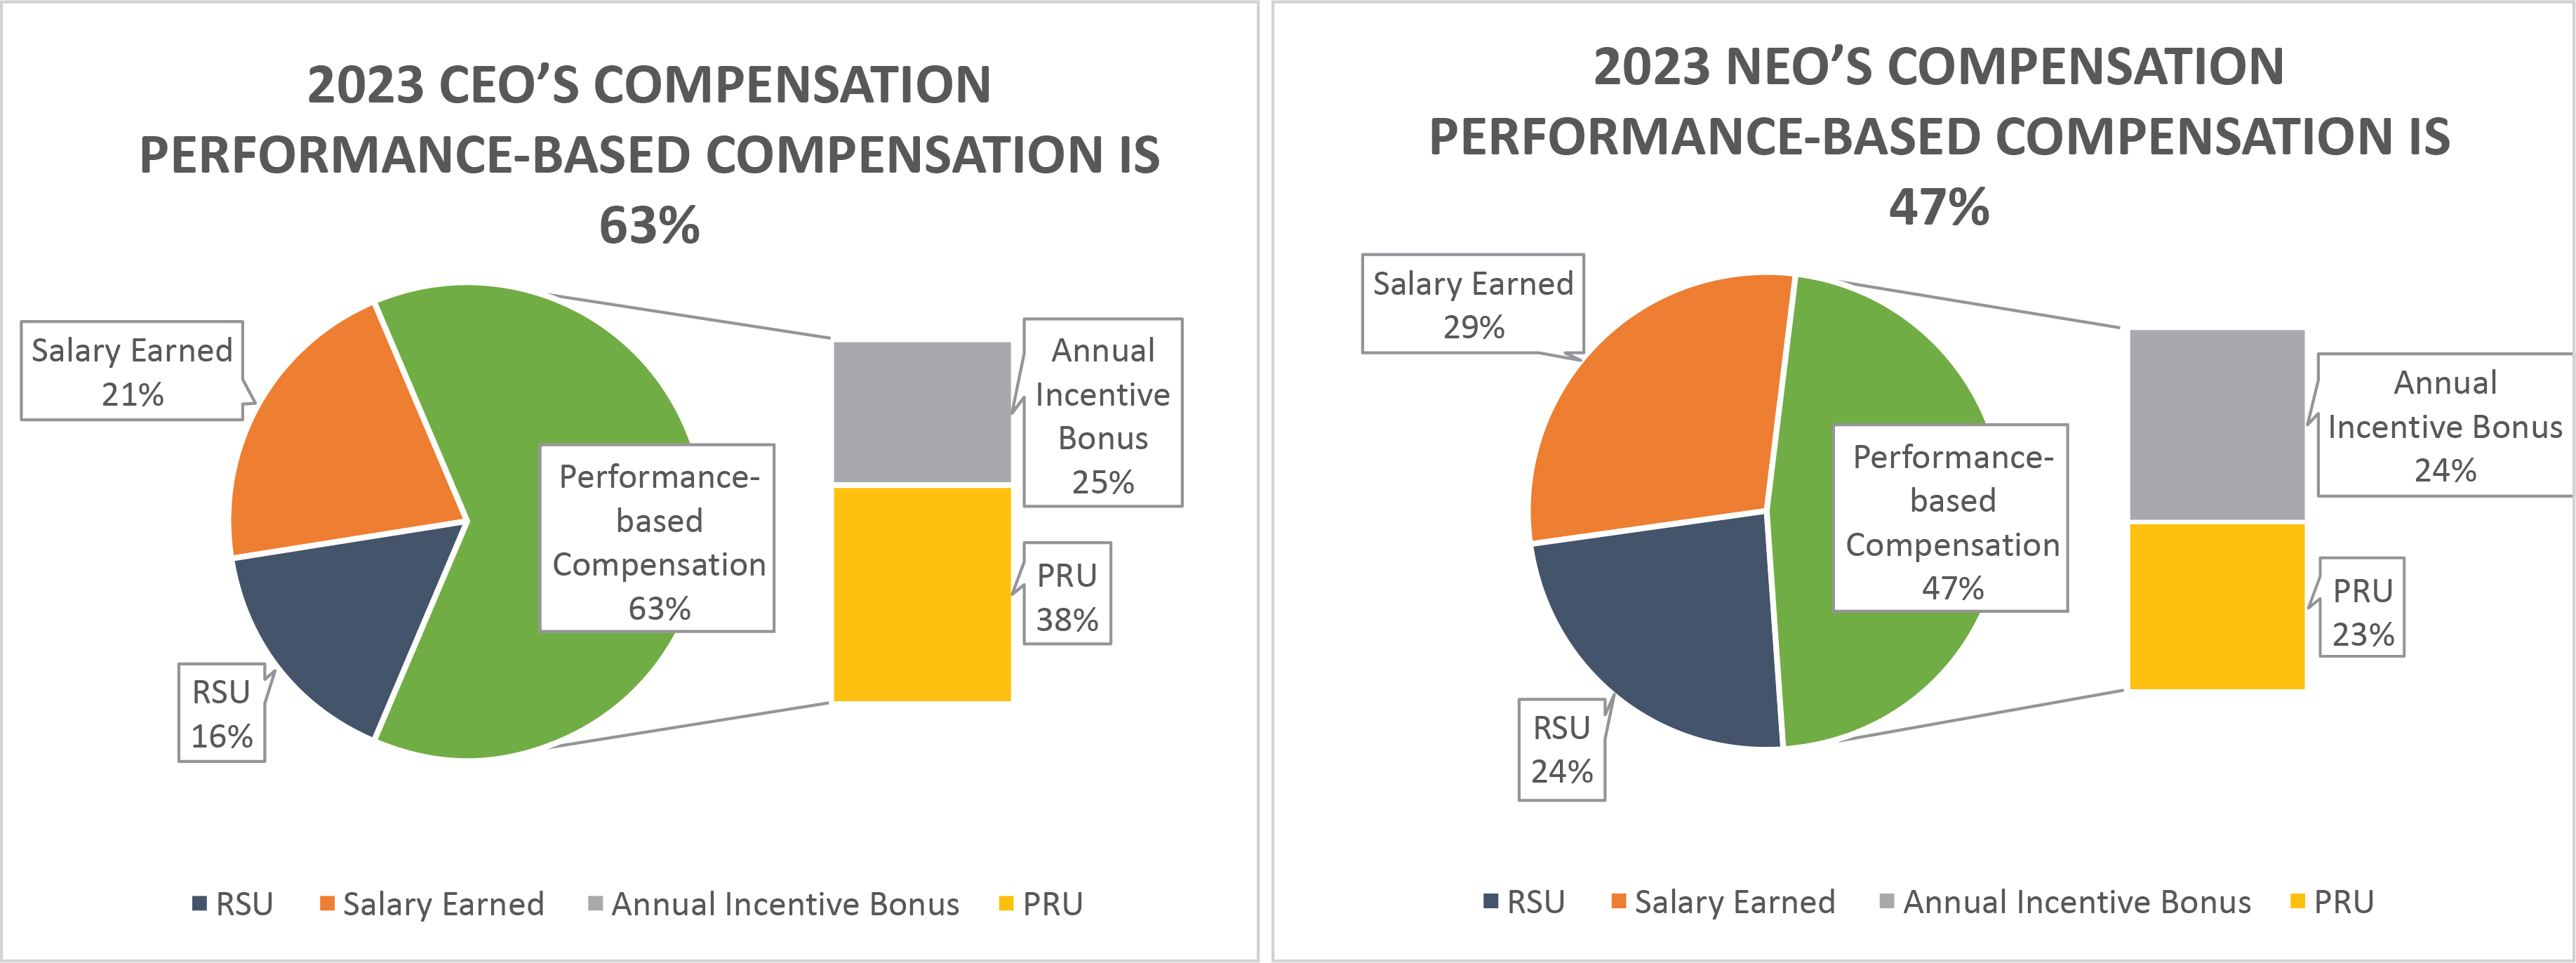 Pie graph of CEO compensation for 2023 split between salary (21%), RSU (21%), and performance based compensation (63%)